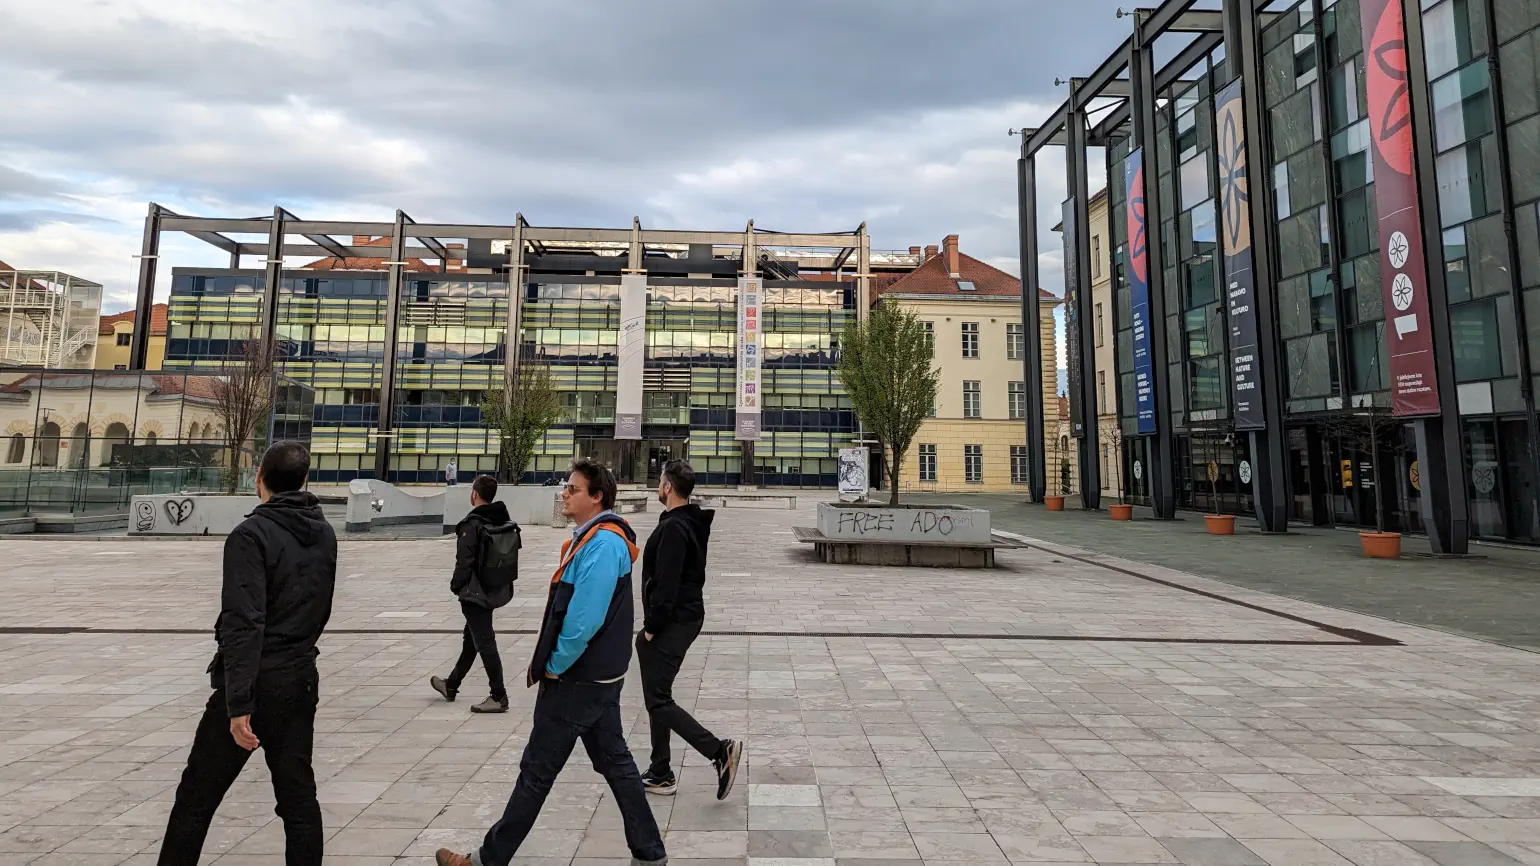 4 men walking left across a city square in front of buildings with modern architecture